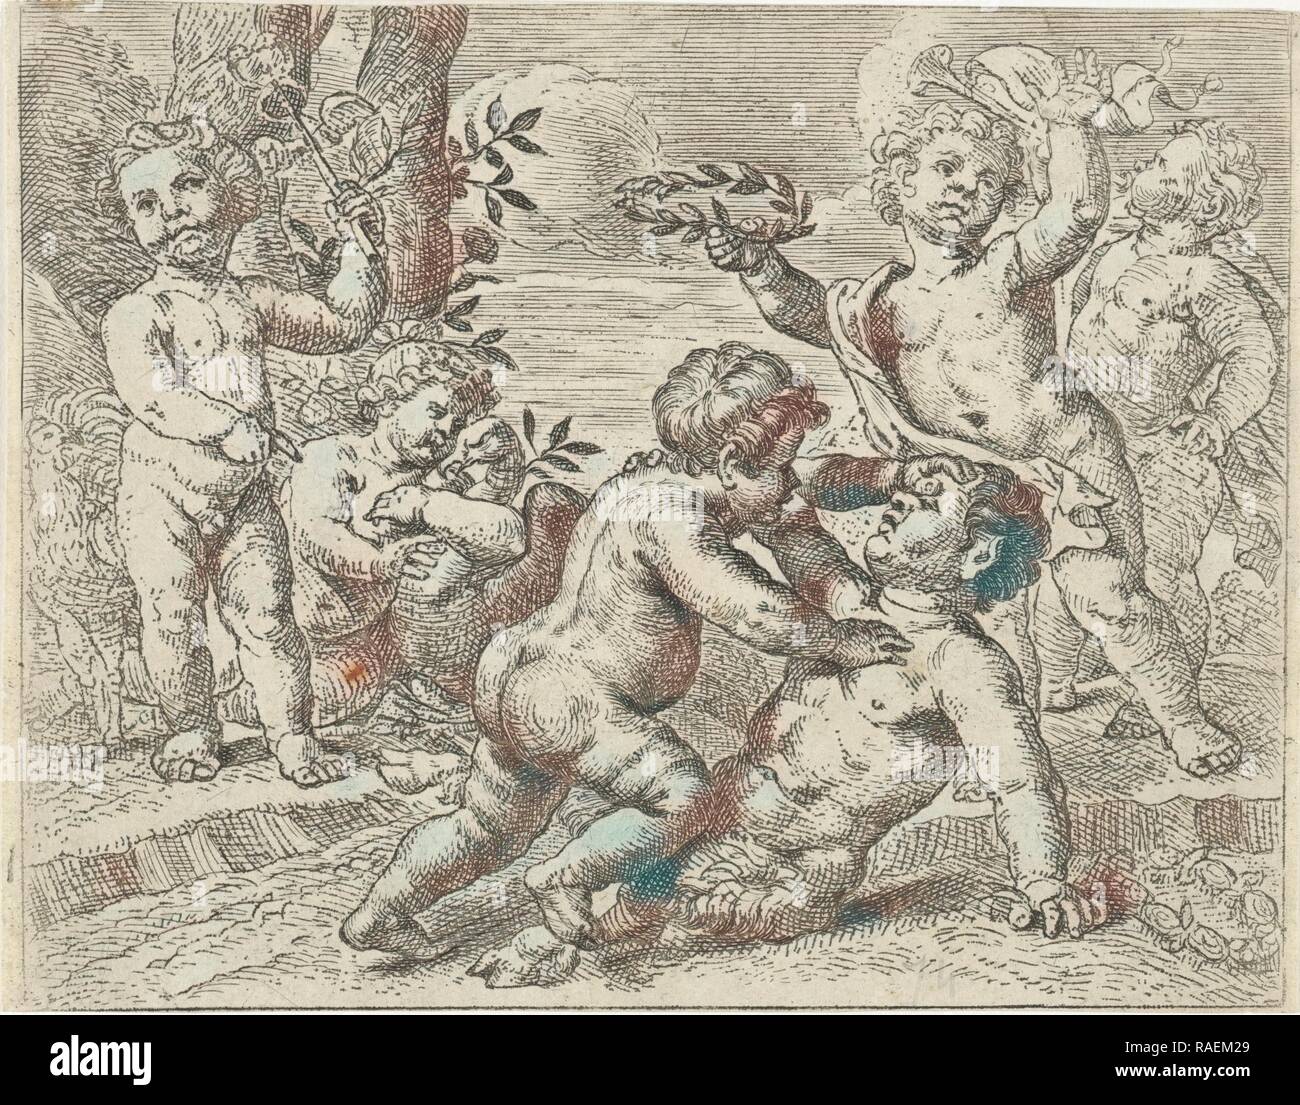 Fighting putti, Peter van Lint, 1619 - 169. Reimagined by Gibon. Classic art with a modern twist reimagined Stock Photo